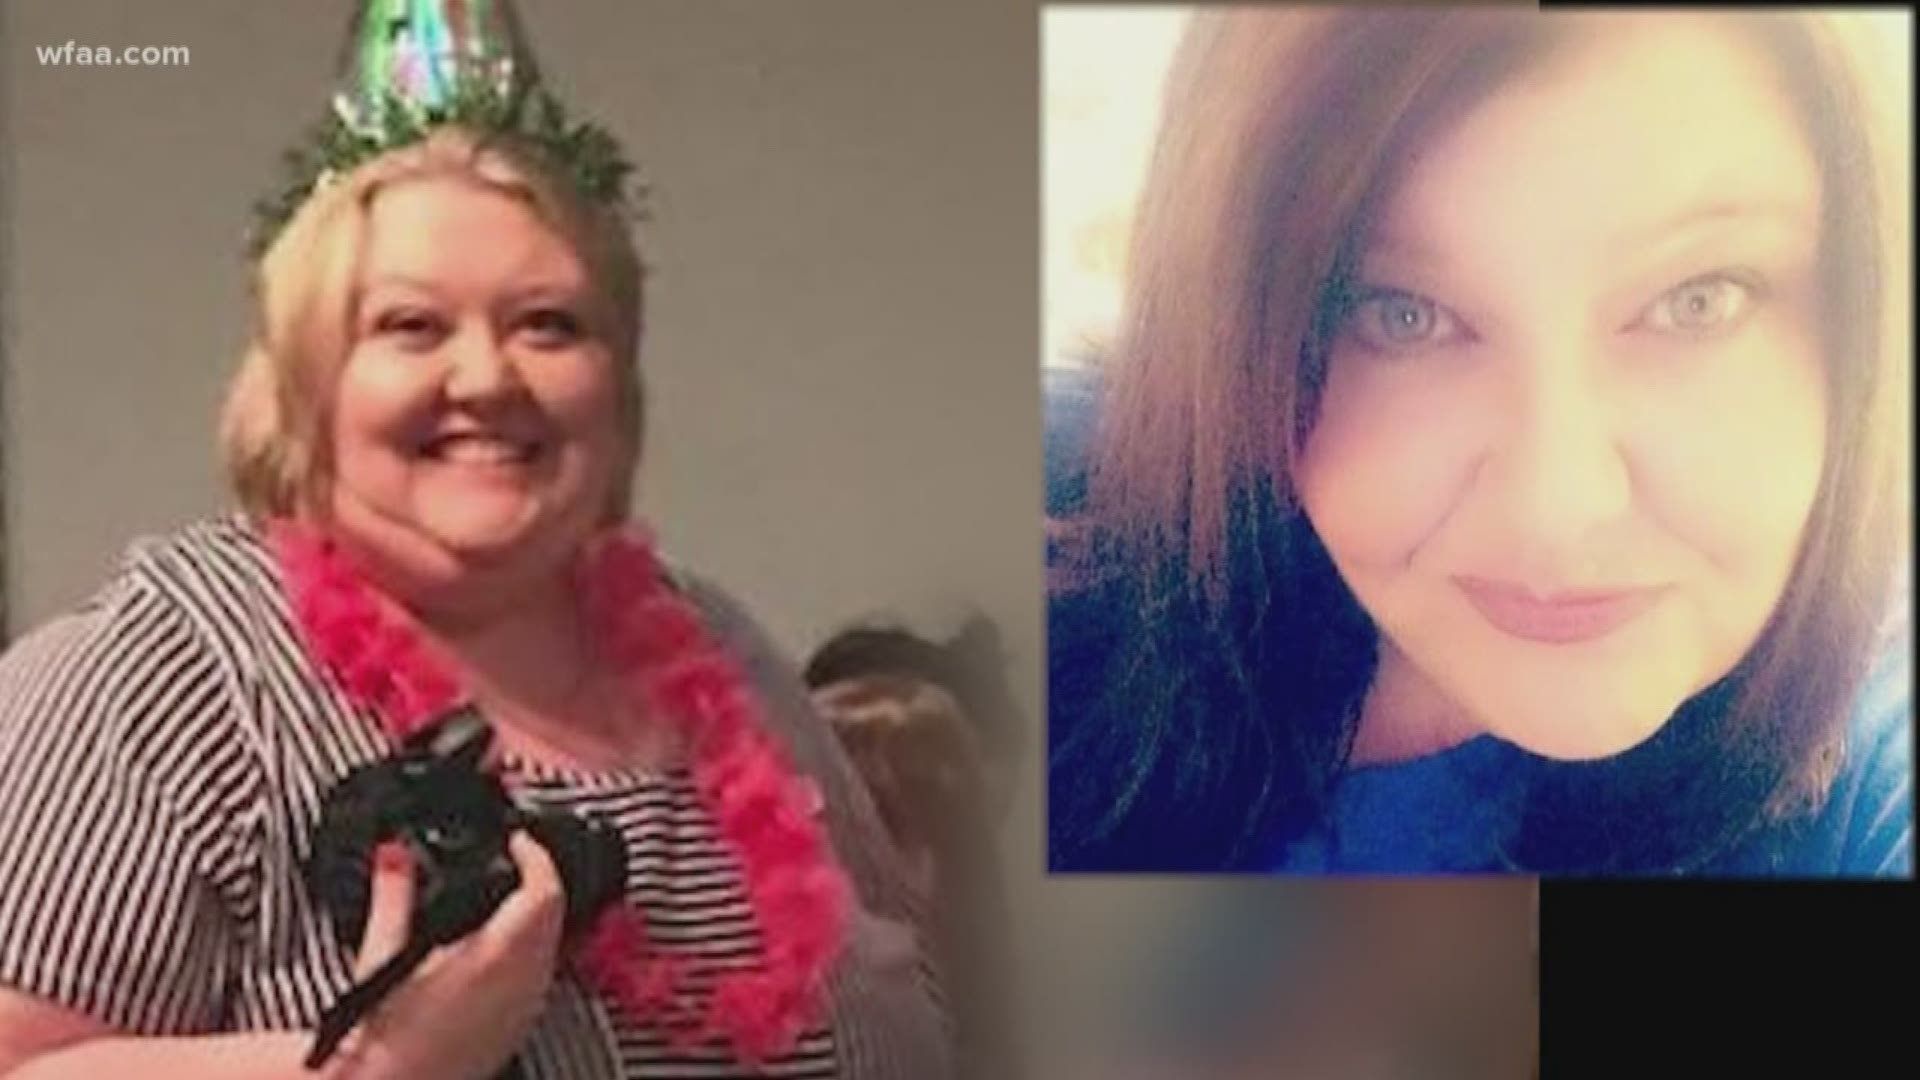 Sandy Reed and Keesha Gibbs were sisters. On Friday night while returning home from a football game, their vehicle was hit head-on by a Chevy pick-up.